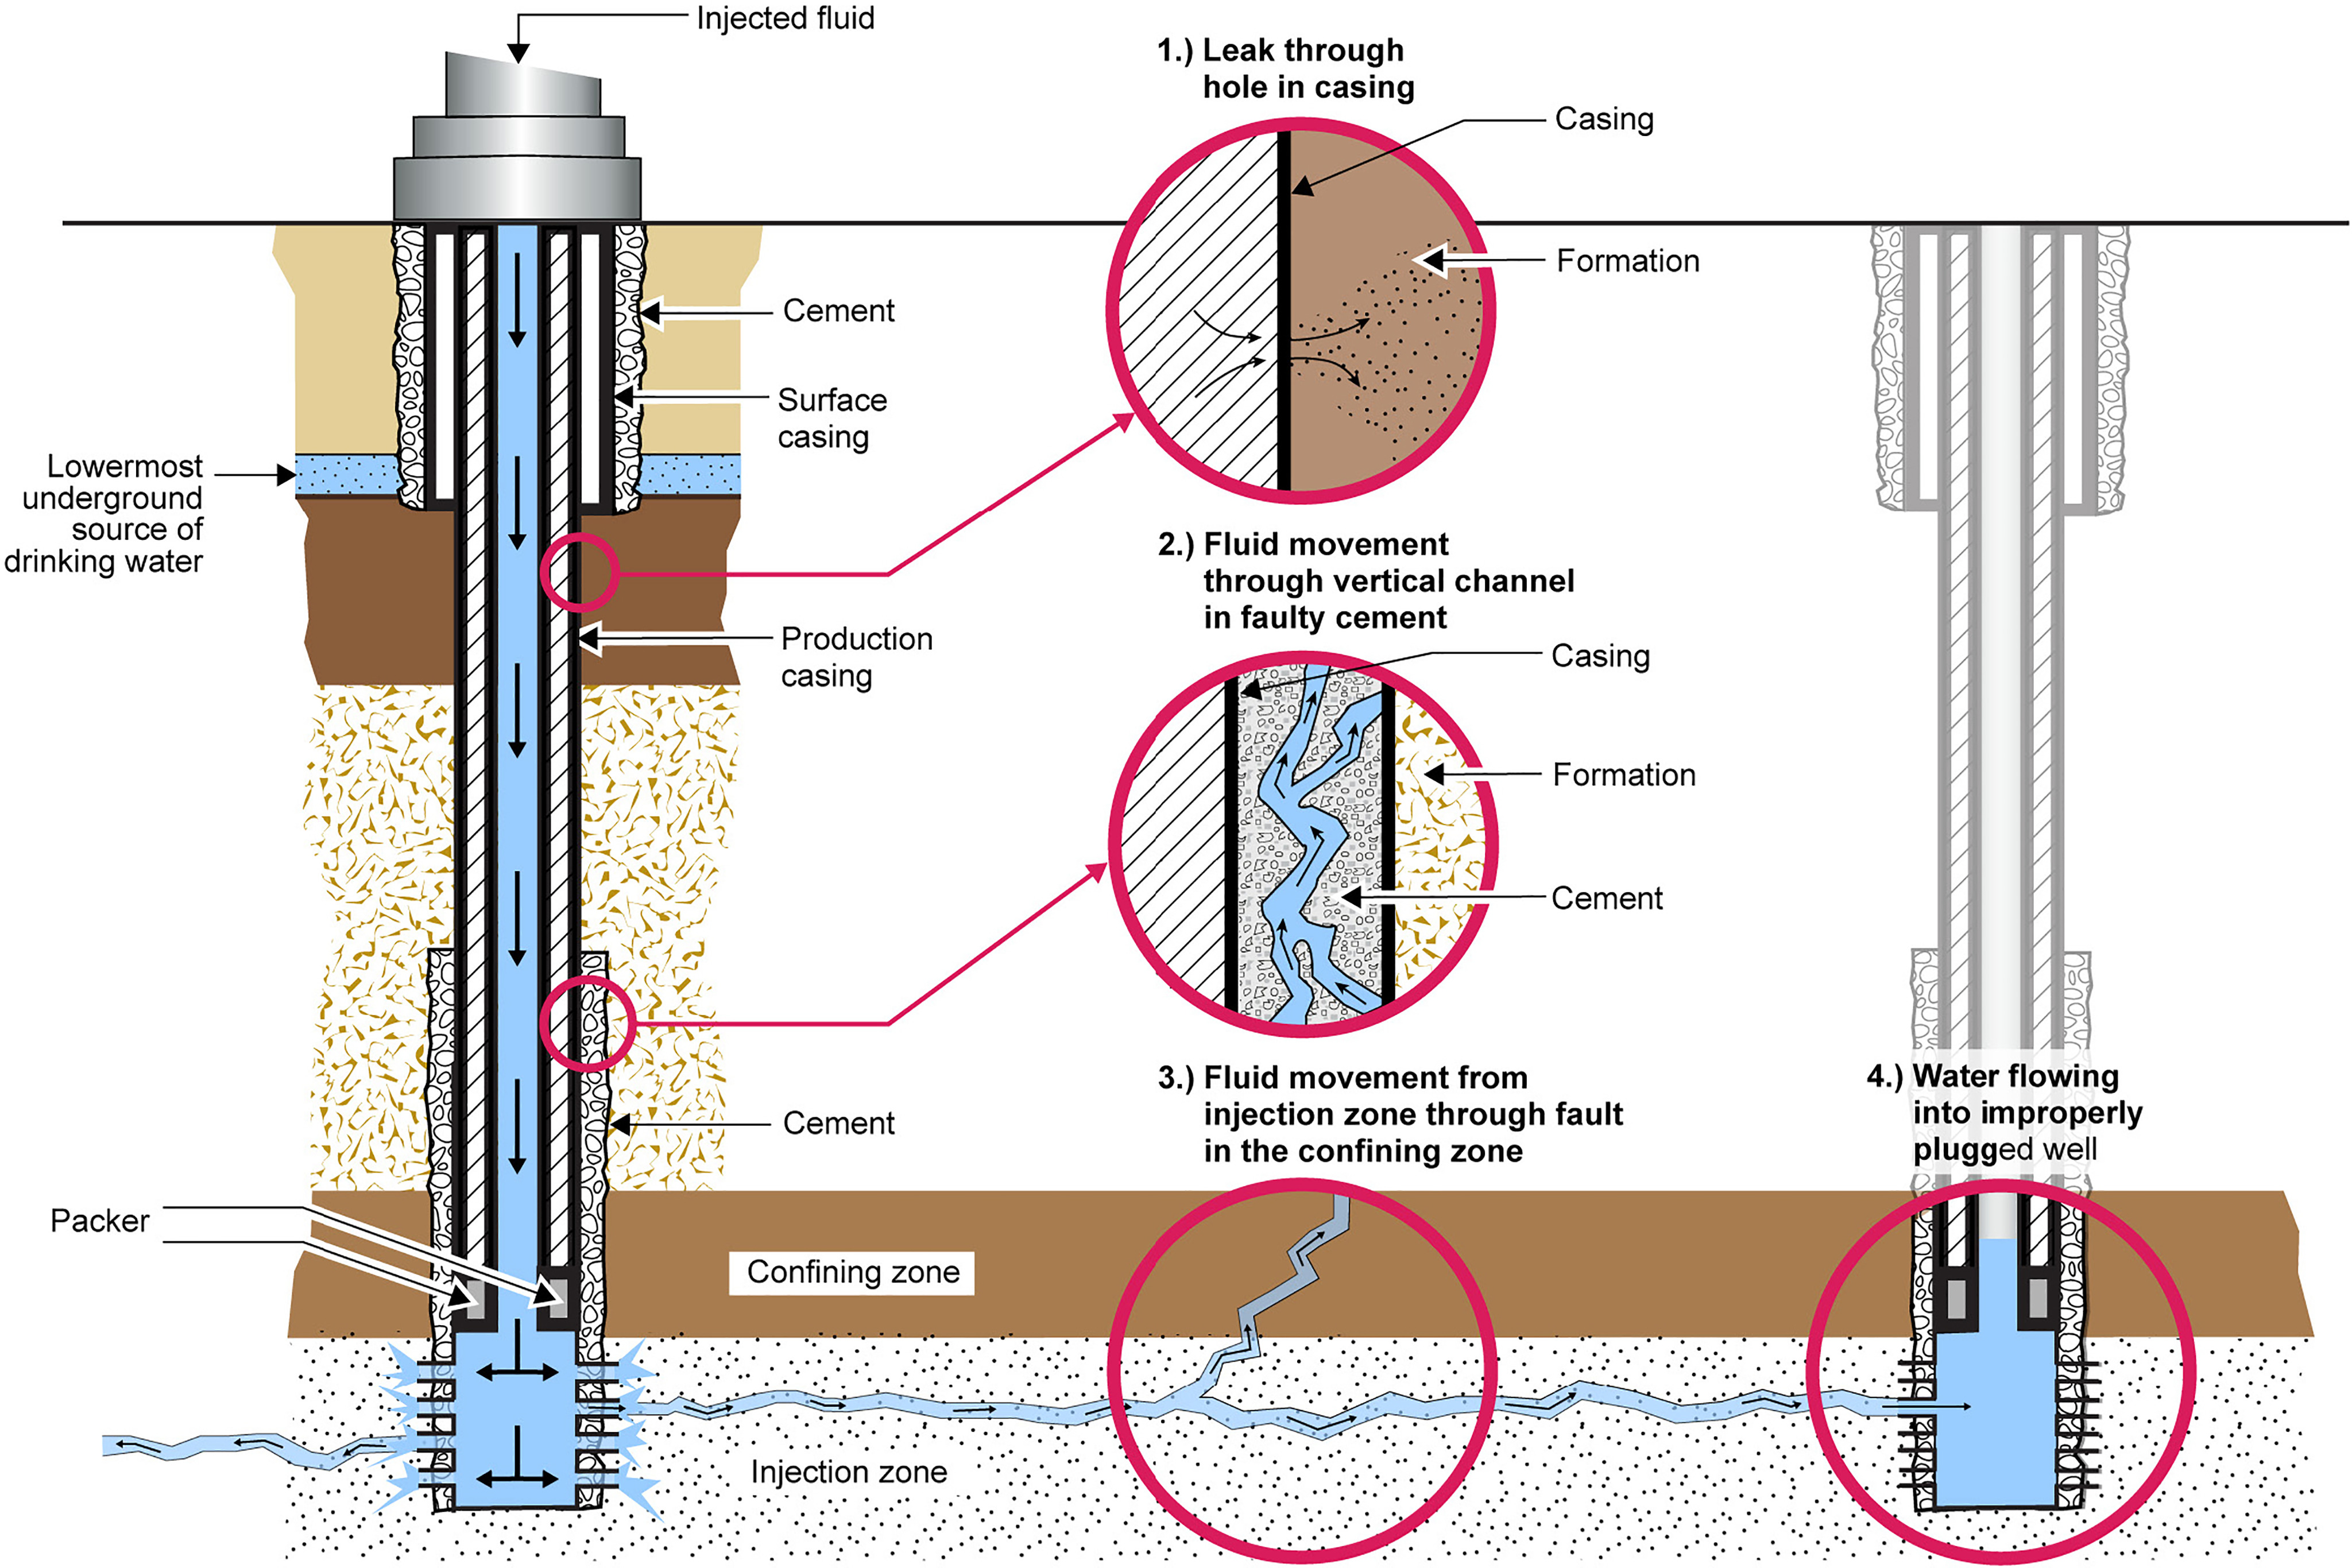 An injection well with potential opportunities for contamination of groundwater labeled.